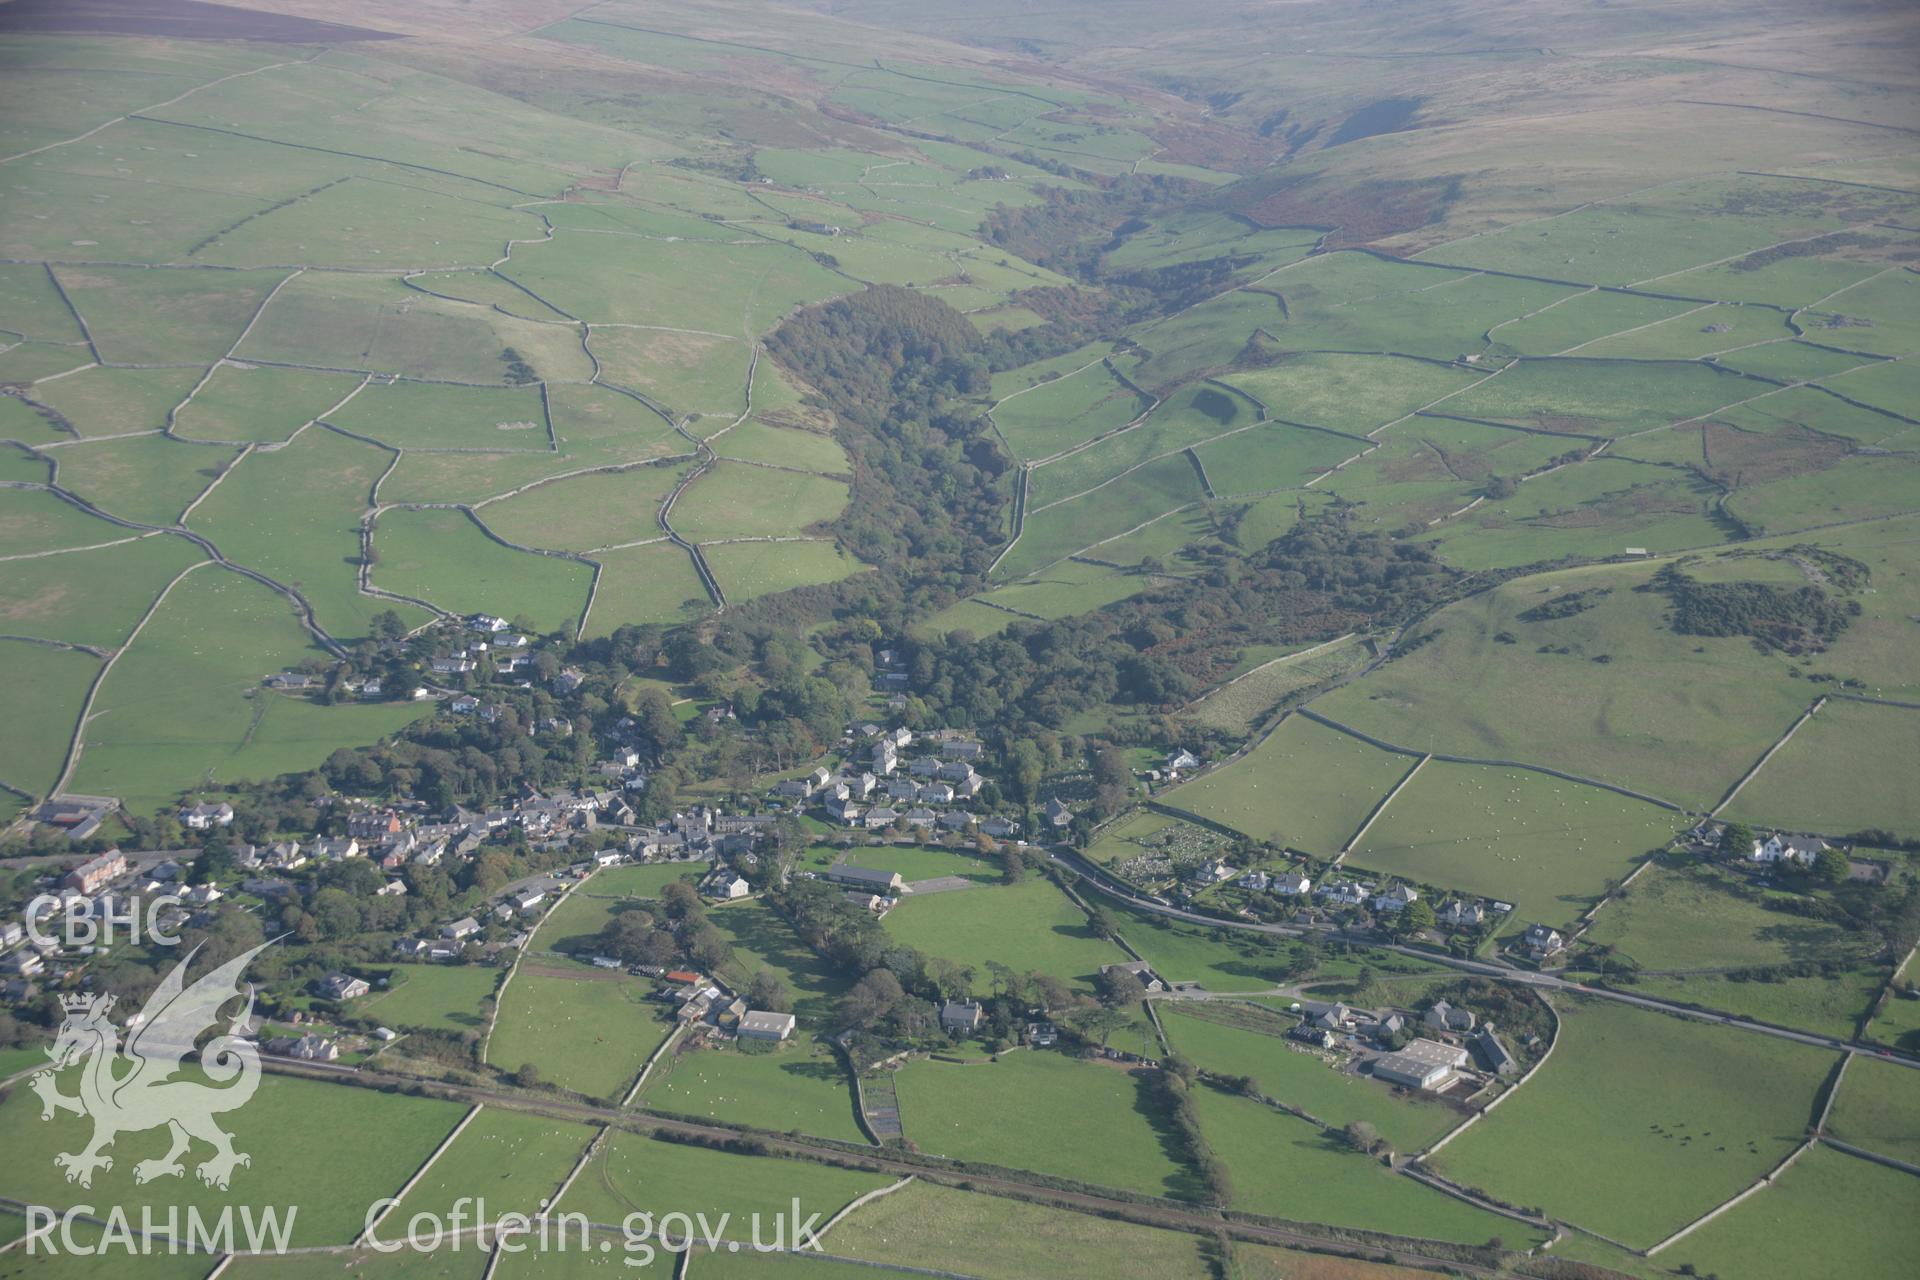 RCAHMW colour oblique aerial photograph of Llwyngwril, village, viewed from the west. Taken on 17 October 2005 by Toby Driver